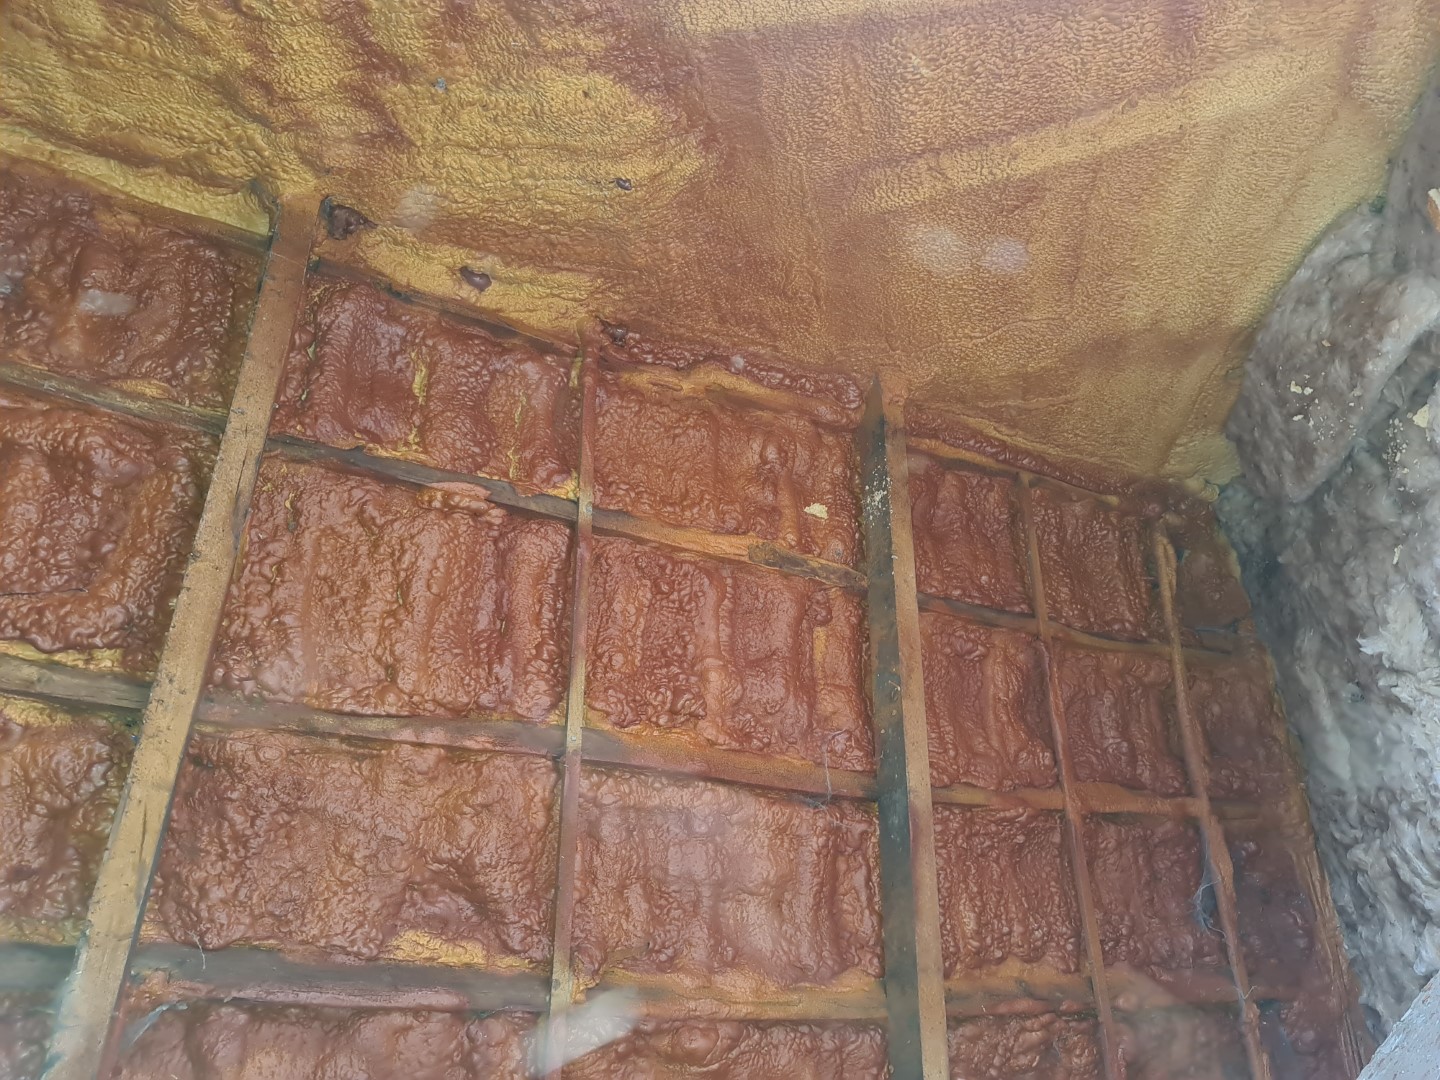 spray foam insulation covering beams and stonework